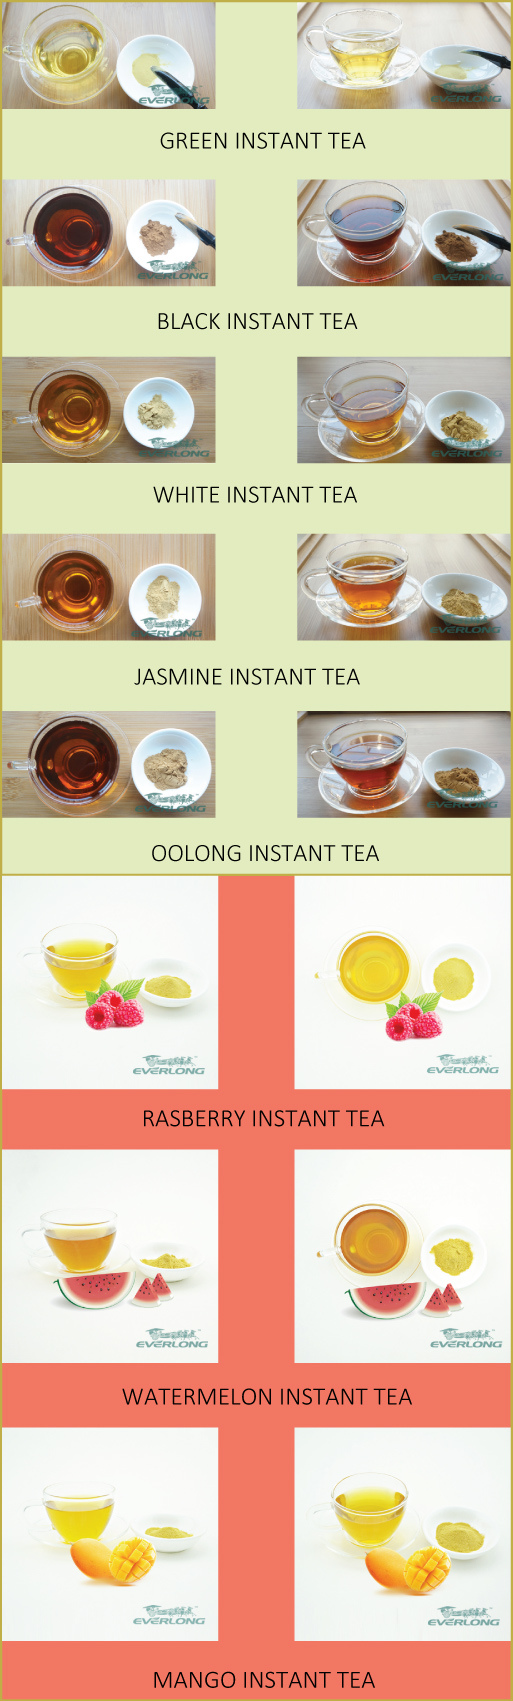 Instant Tea Extract Powder with Watermelon Flavor (IT1503)